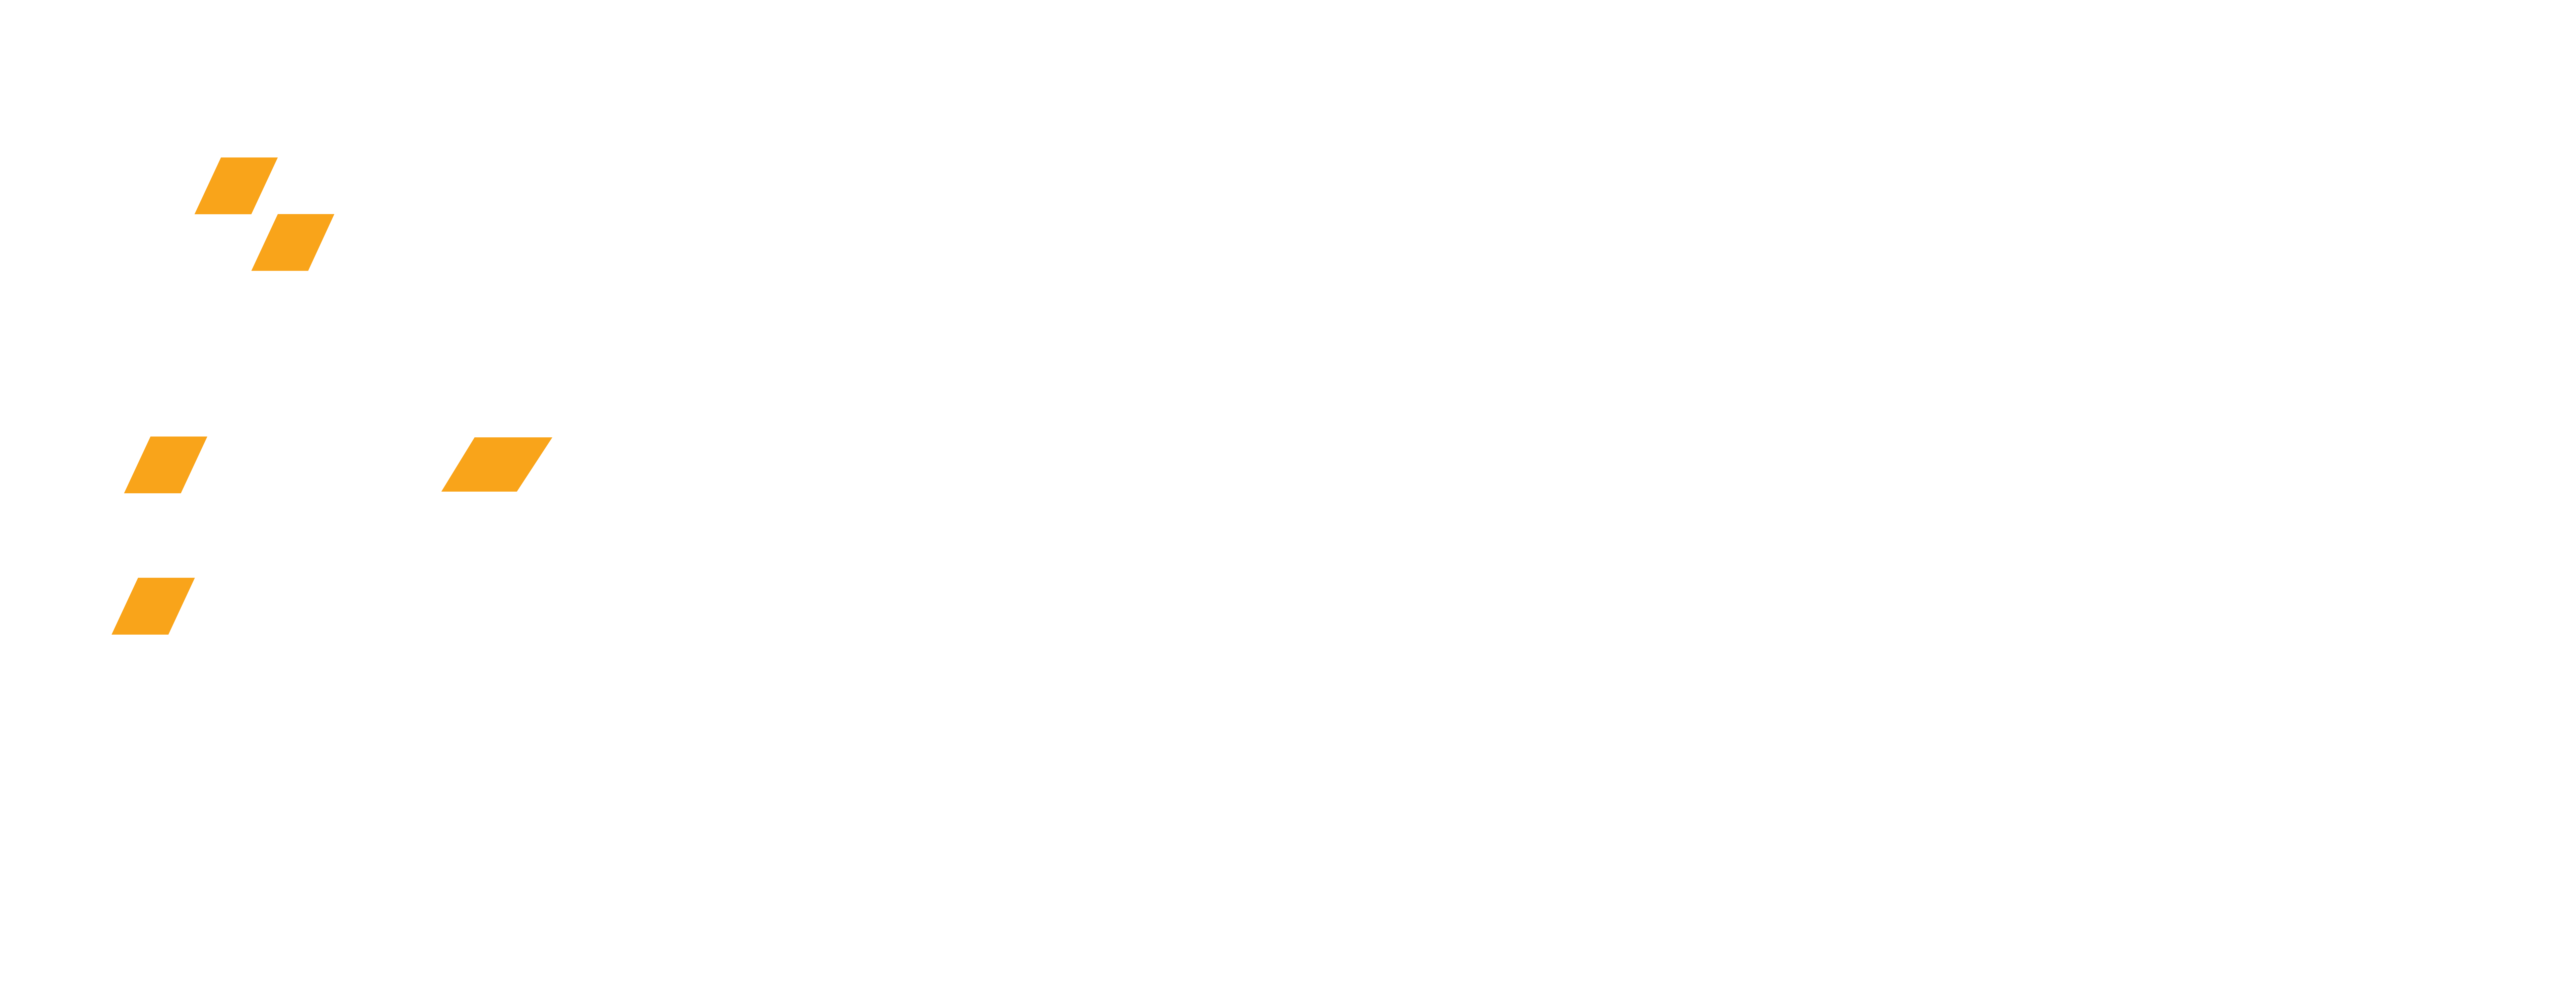 for help using this site please email us at contact@aielloconsulting.com